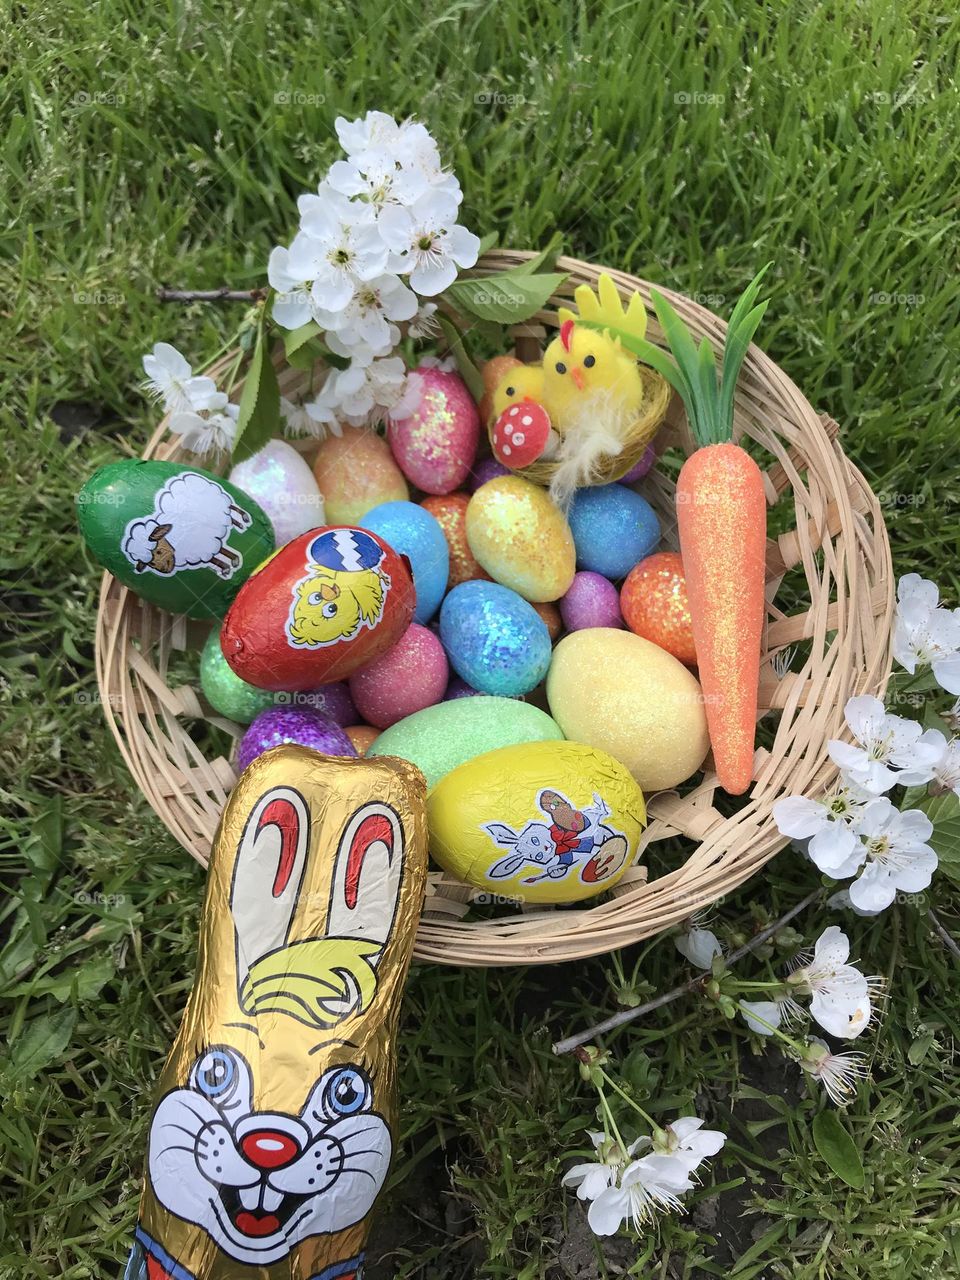 Basket of colorful easter eggs, sweet chocolate eggs, and the chocolate easter bunny